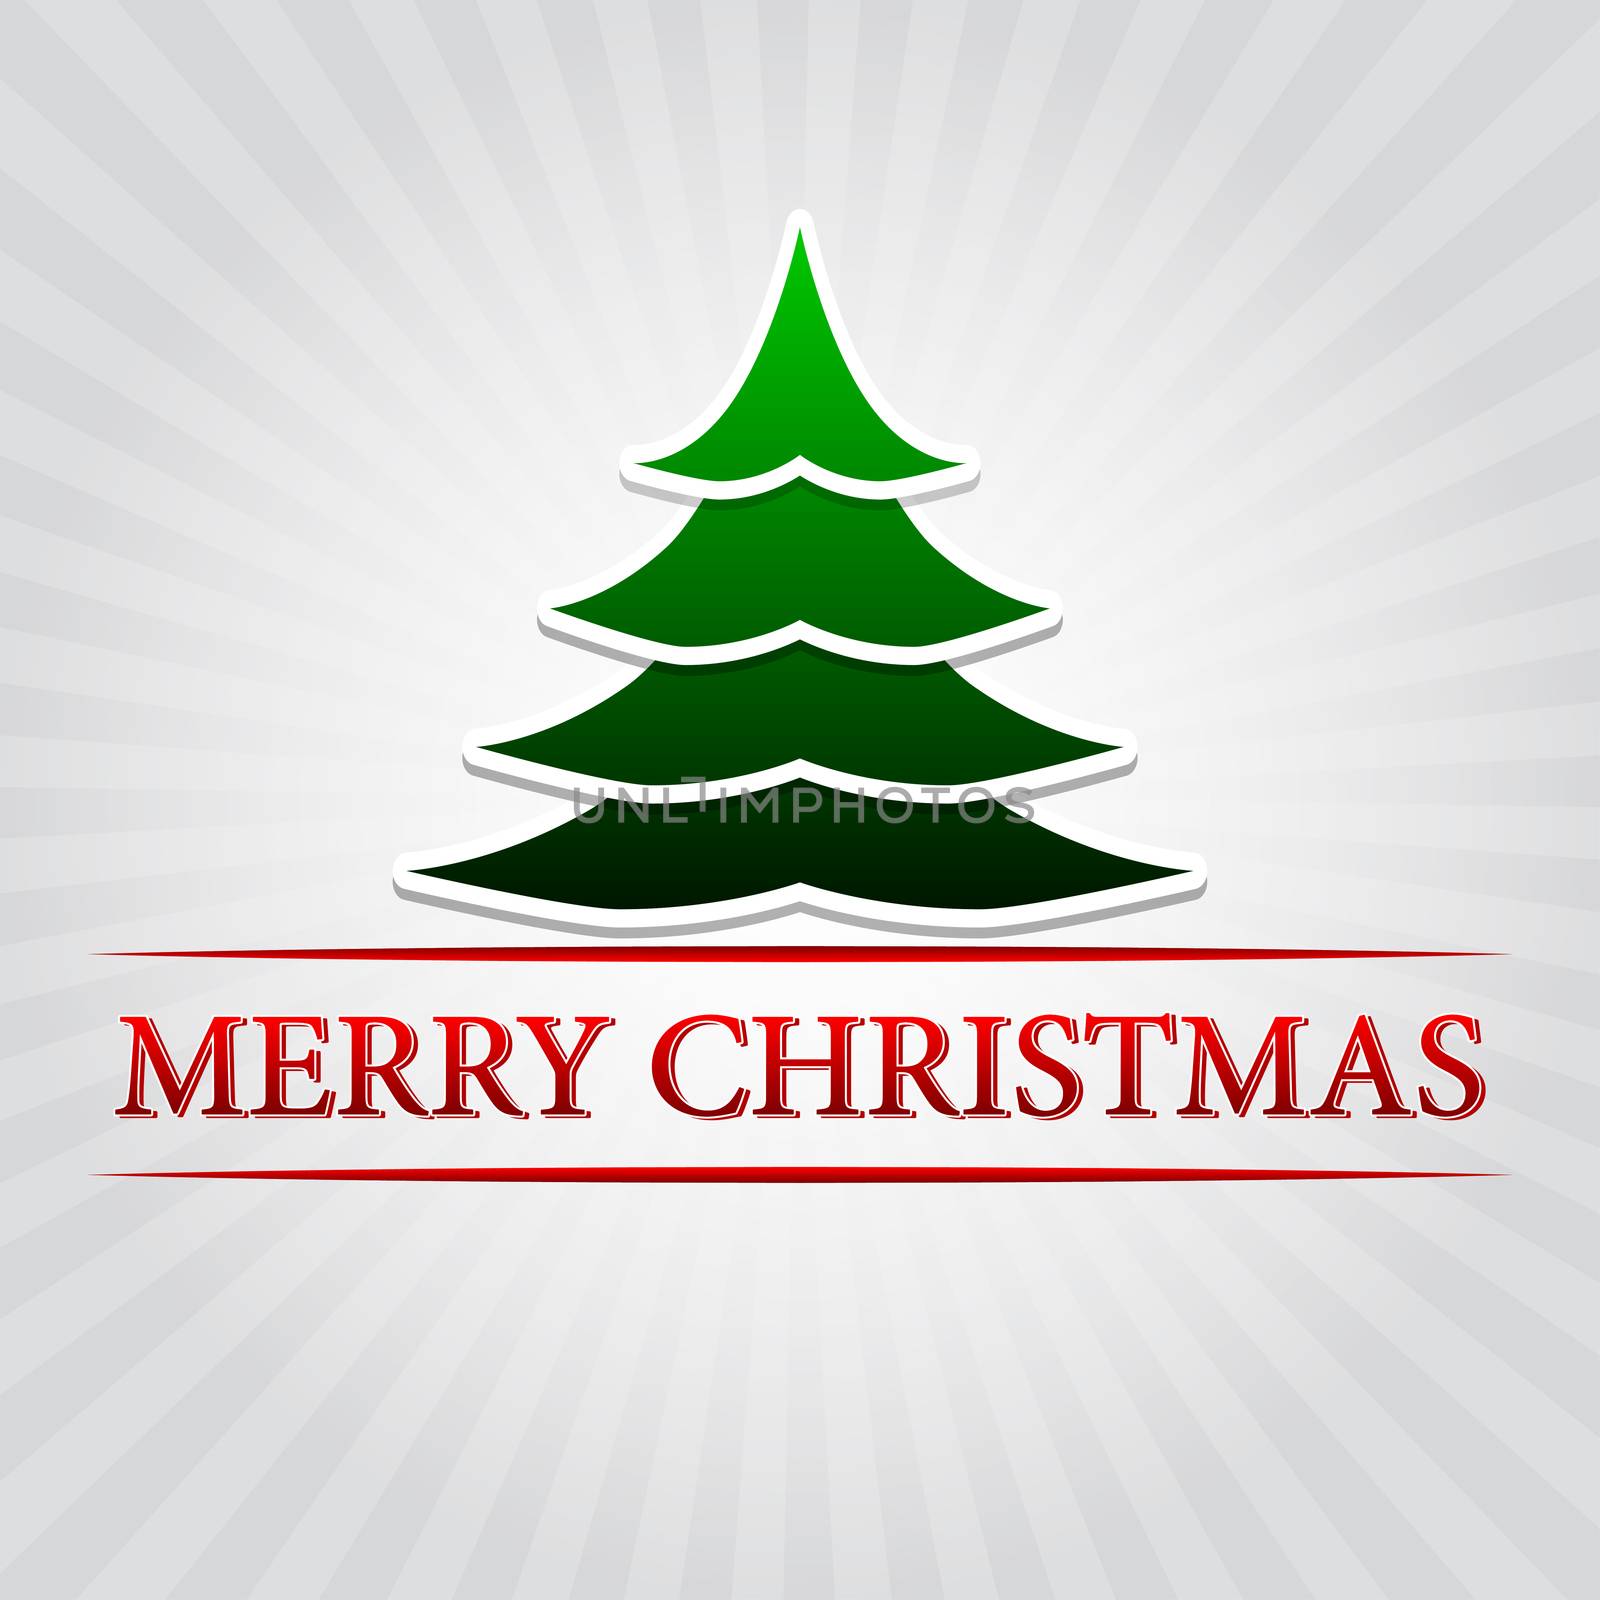 merry christmas - text with green christmas tree sign over silver grey rays